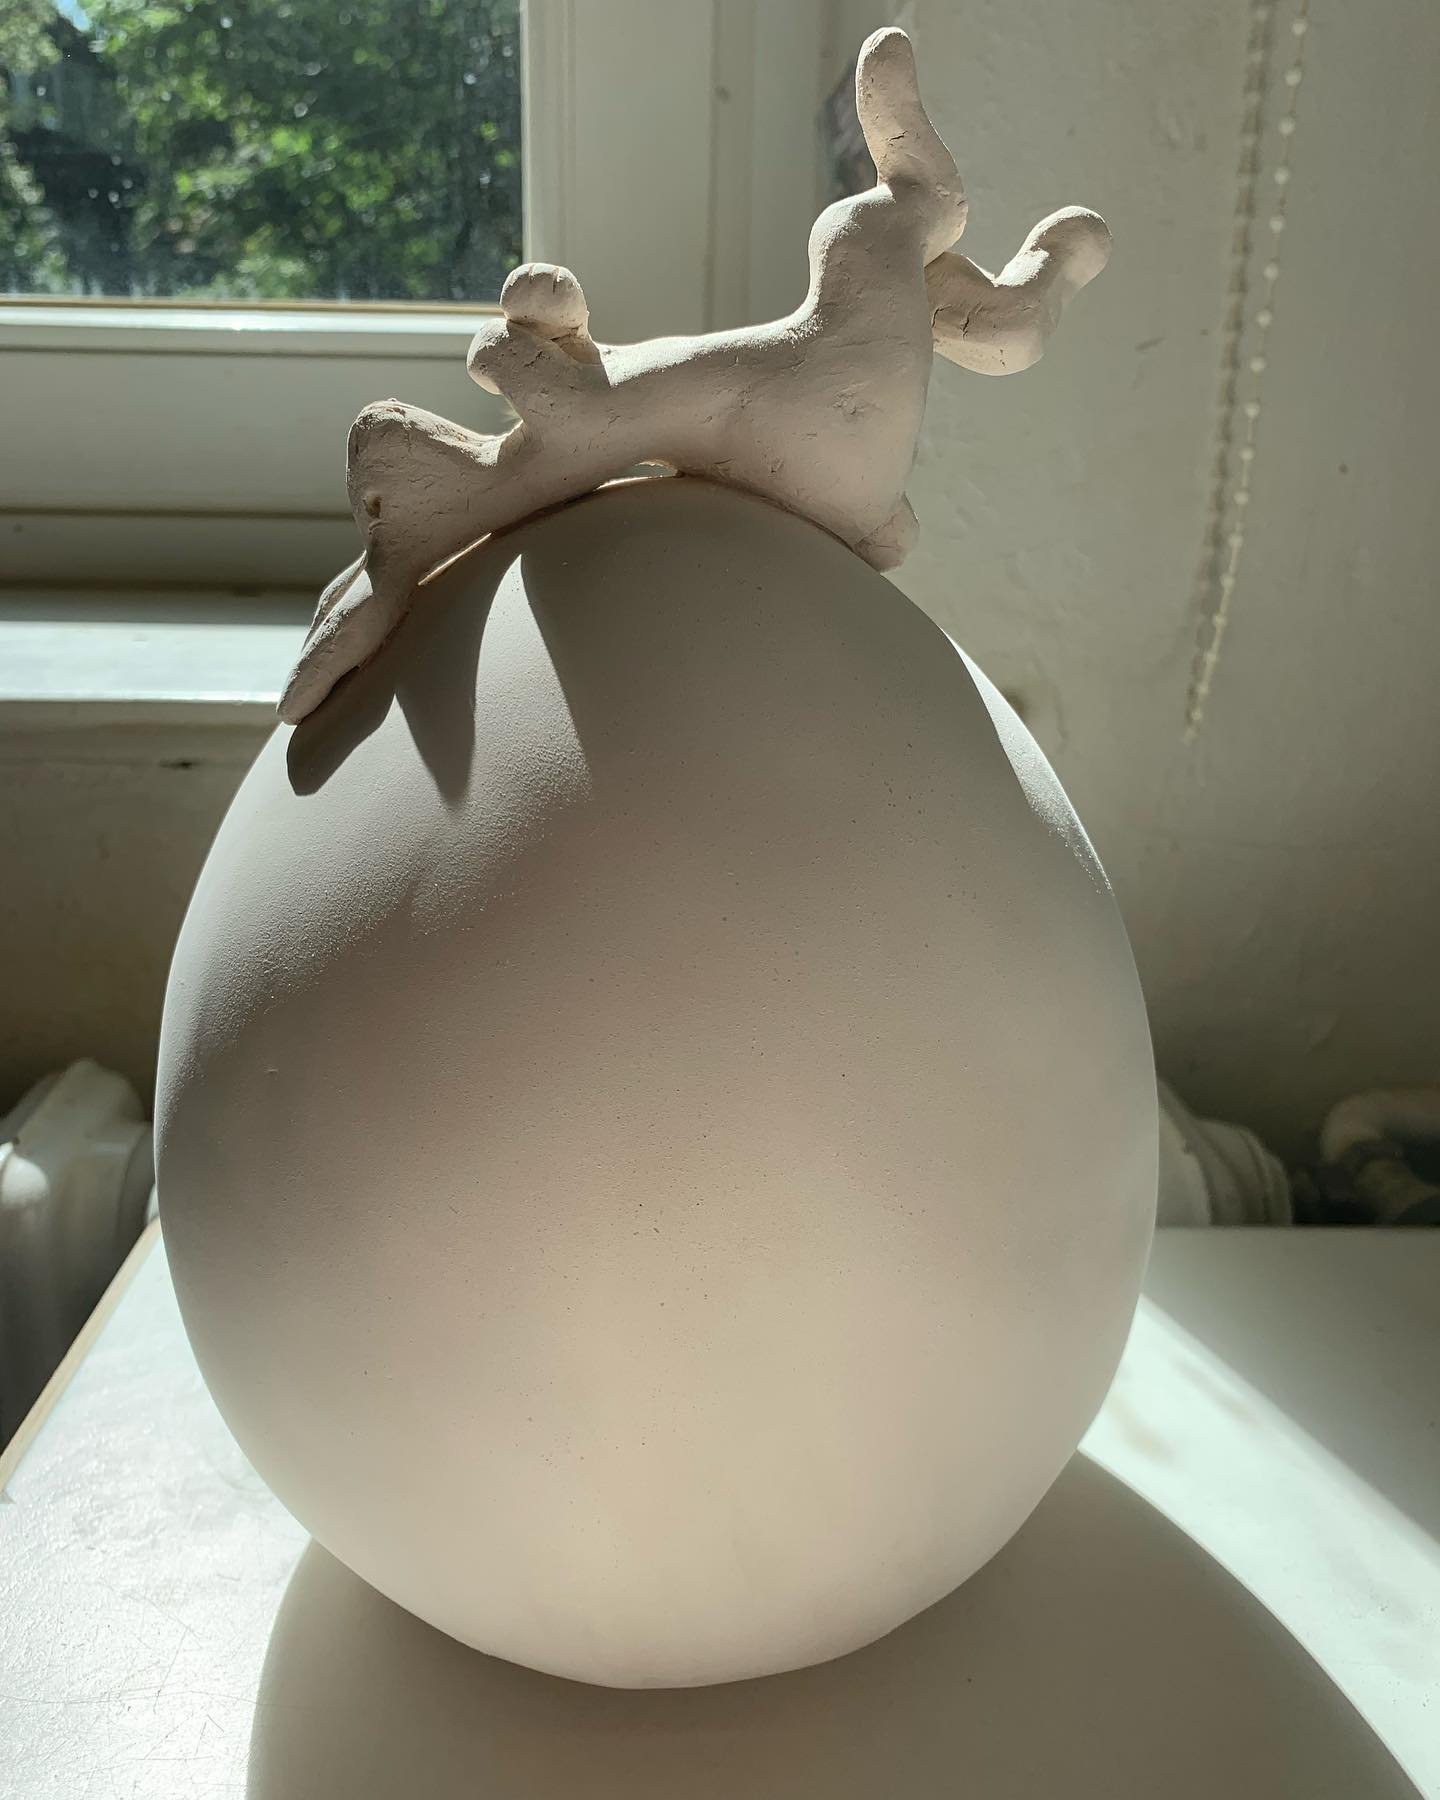 &hellip;ready to be fired&hellip;took me 3 hours to sand the egg to perfection
#rabbit #clay #figure #fired #statue #sculptureart #egg #easterbunny #eastereggs